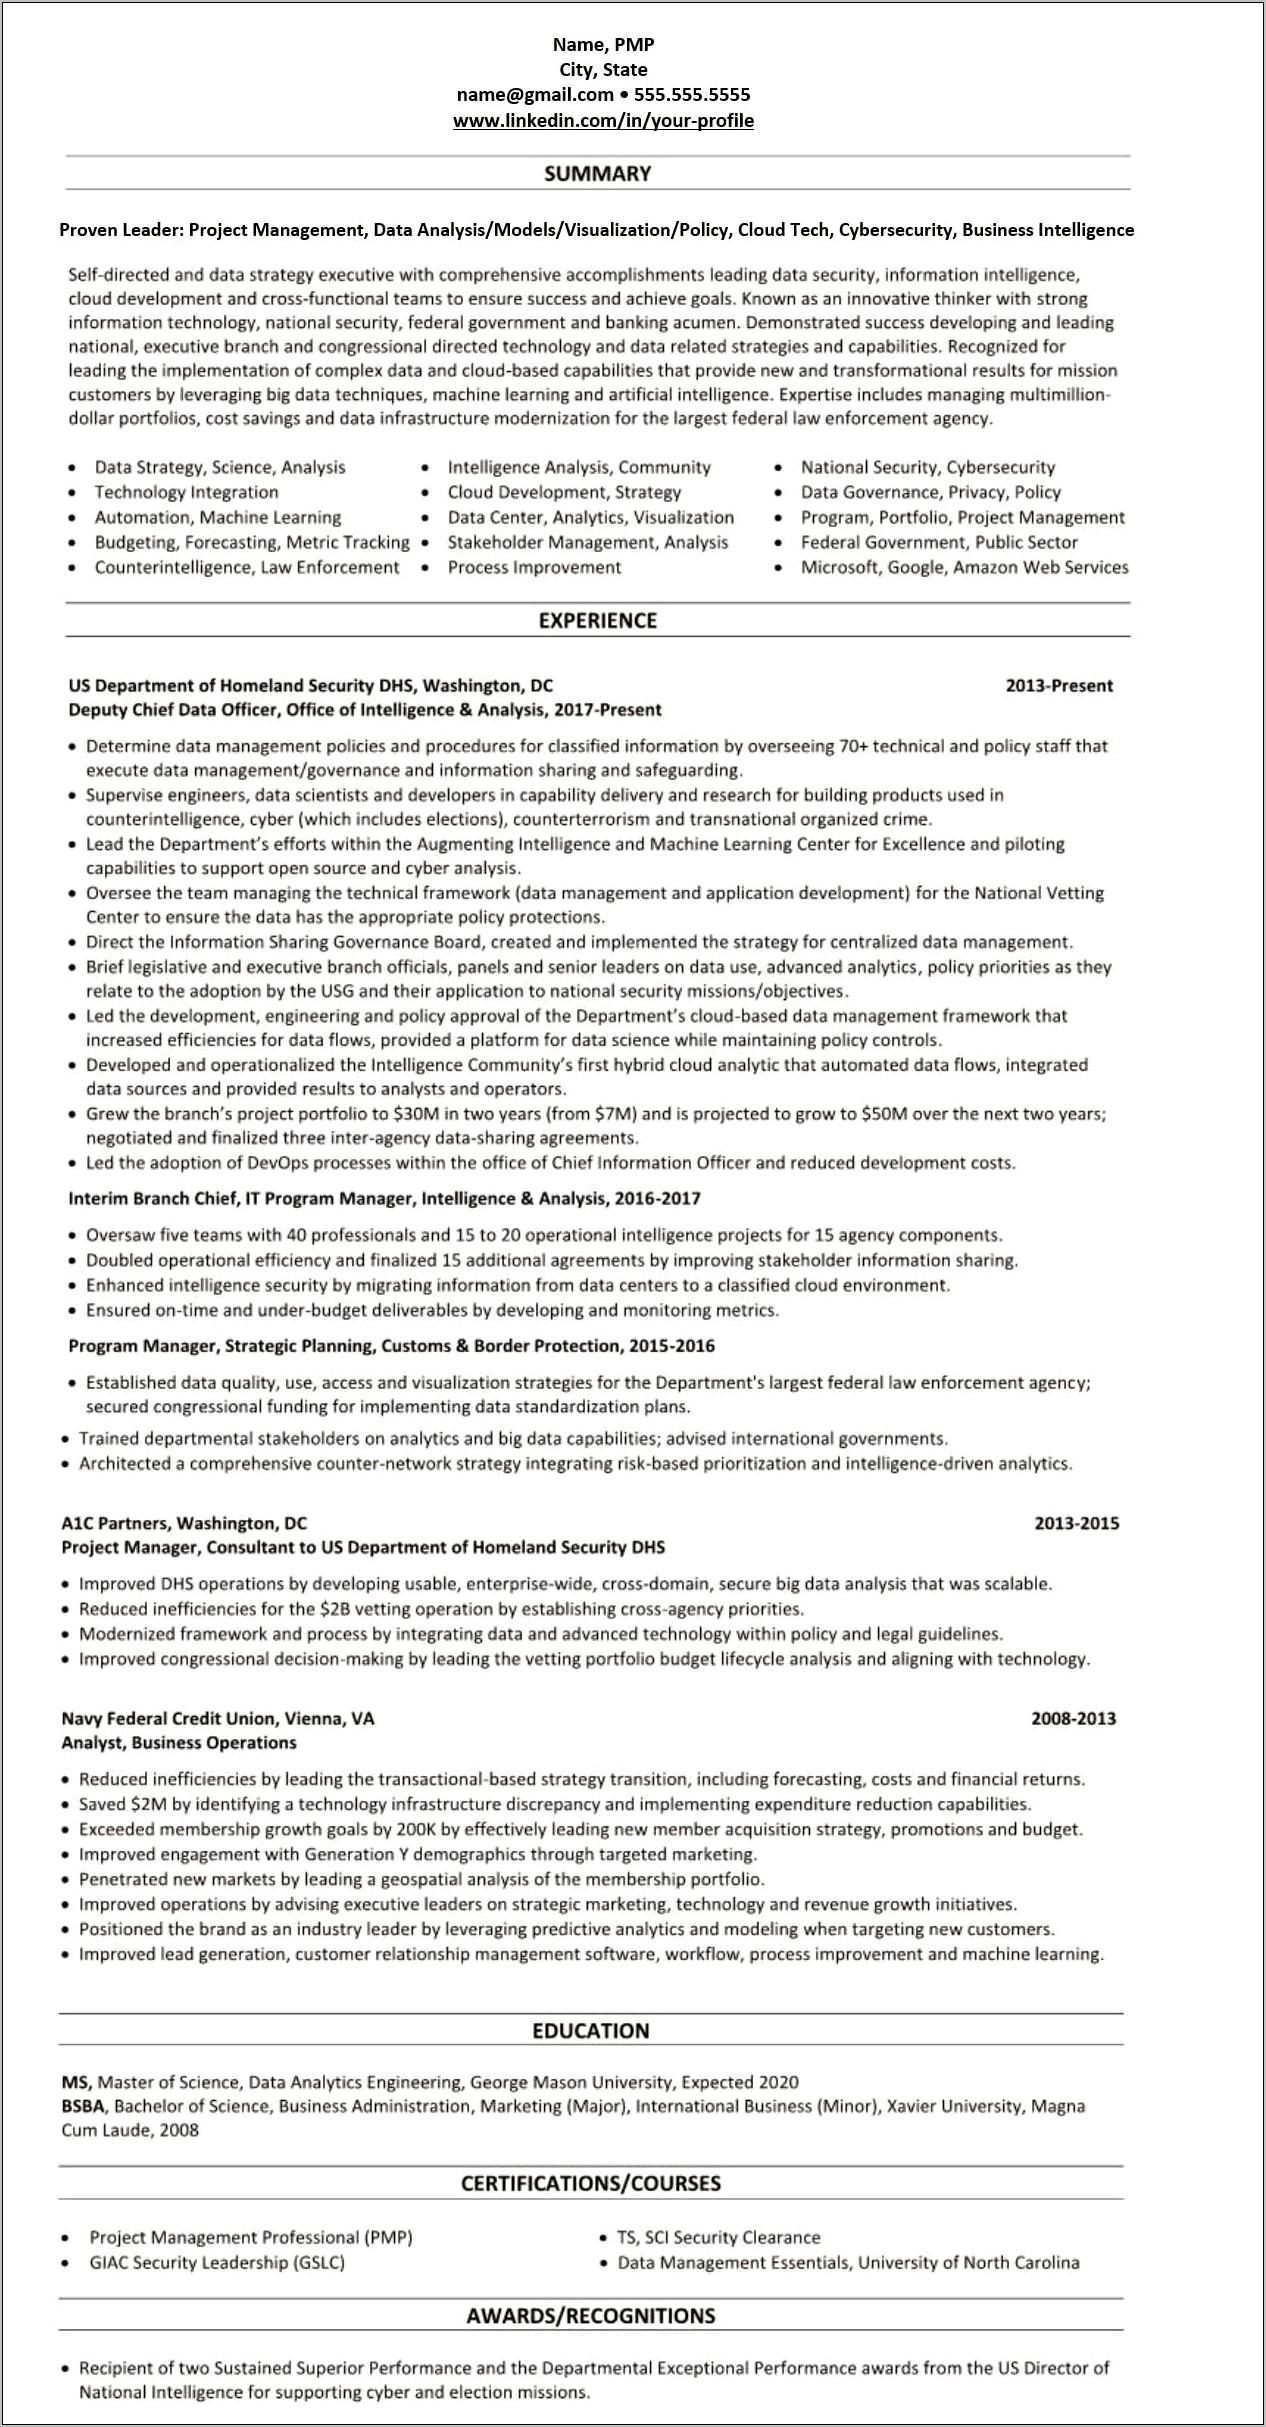 Sample Resume For Project Manager In Telecom